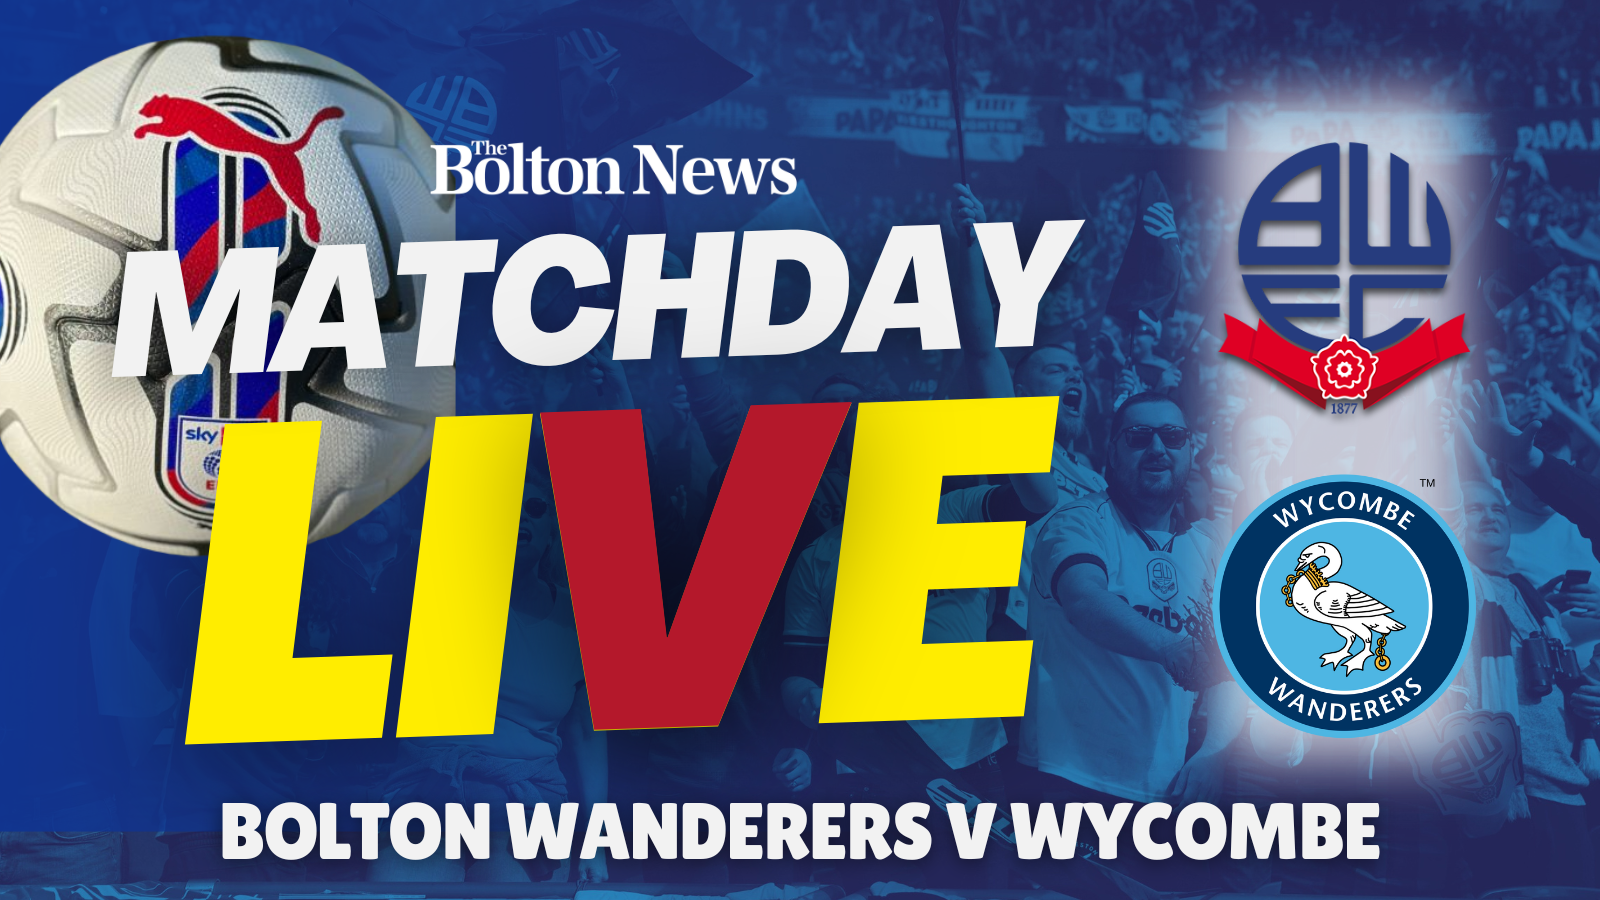 Bolton Wanderers v Wycombe Wanderers - Matchday Live blog